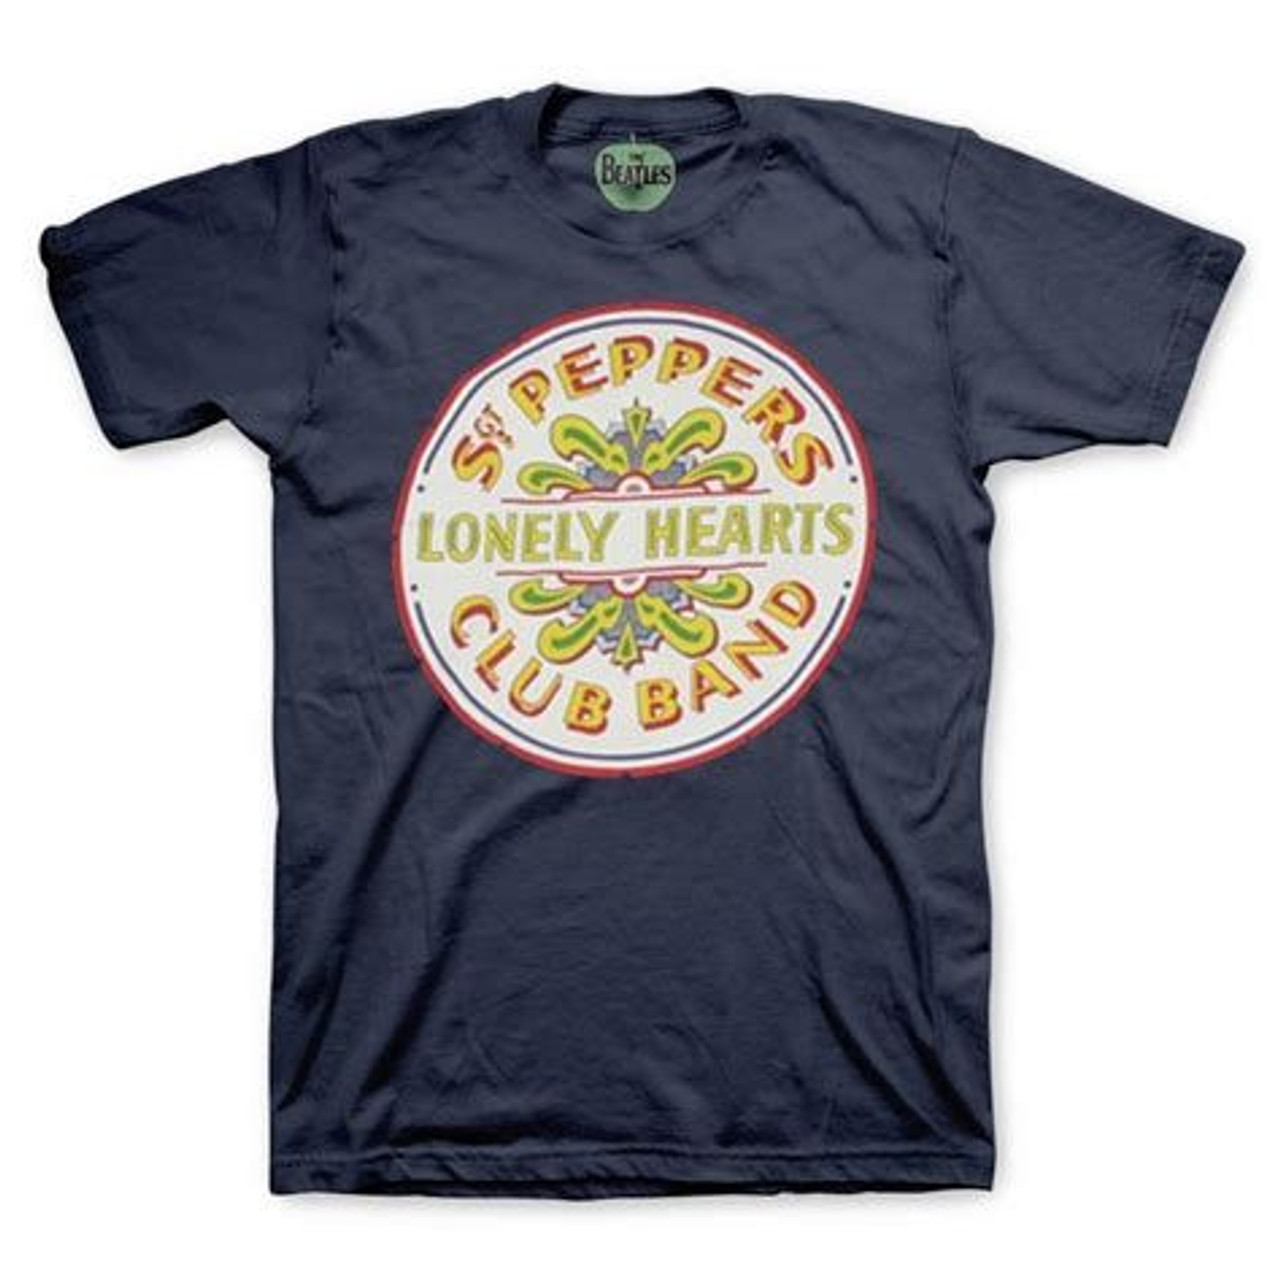 Beatles Seal | Vintage design Band T-shirt Tees Sgt. The Buy Peppers